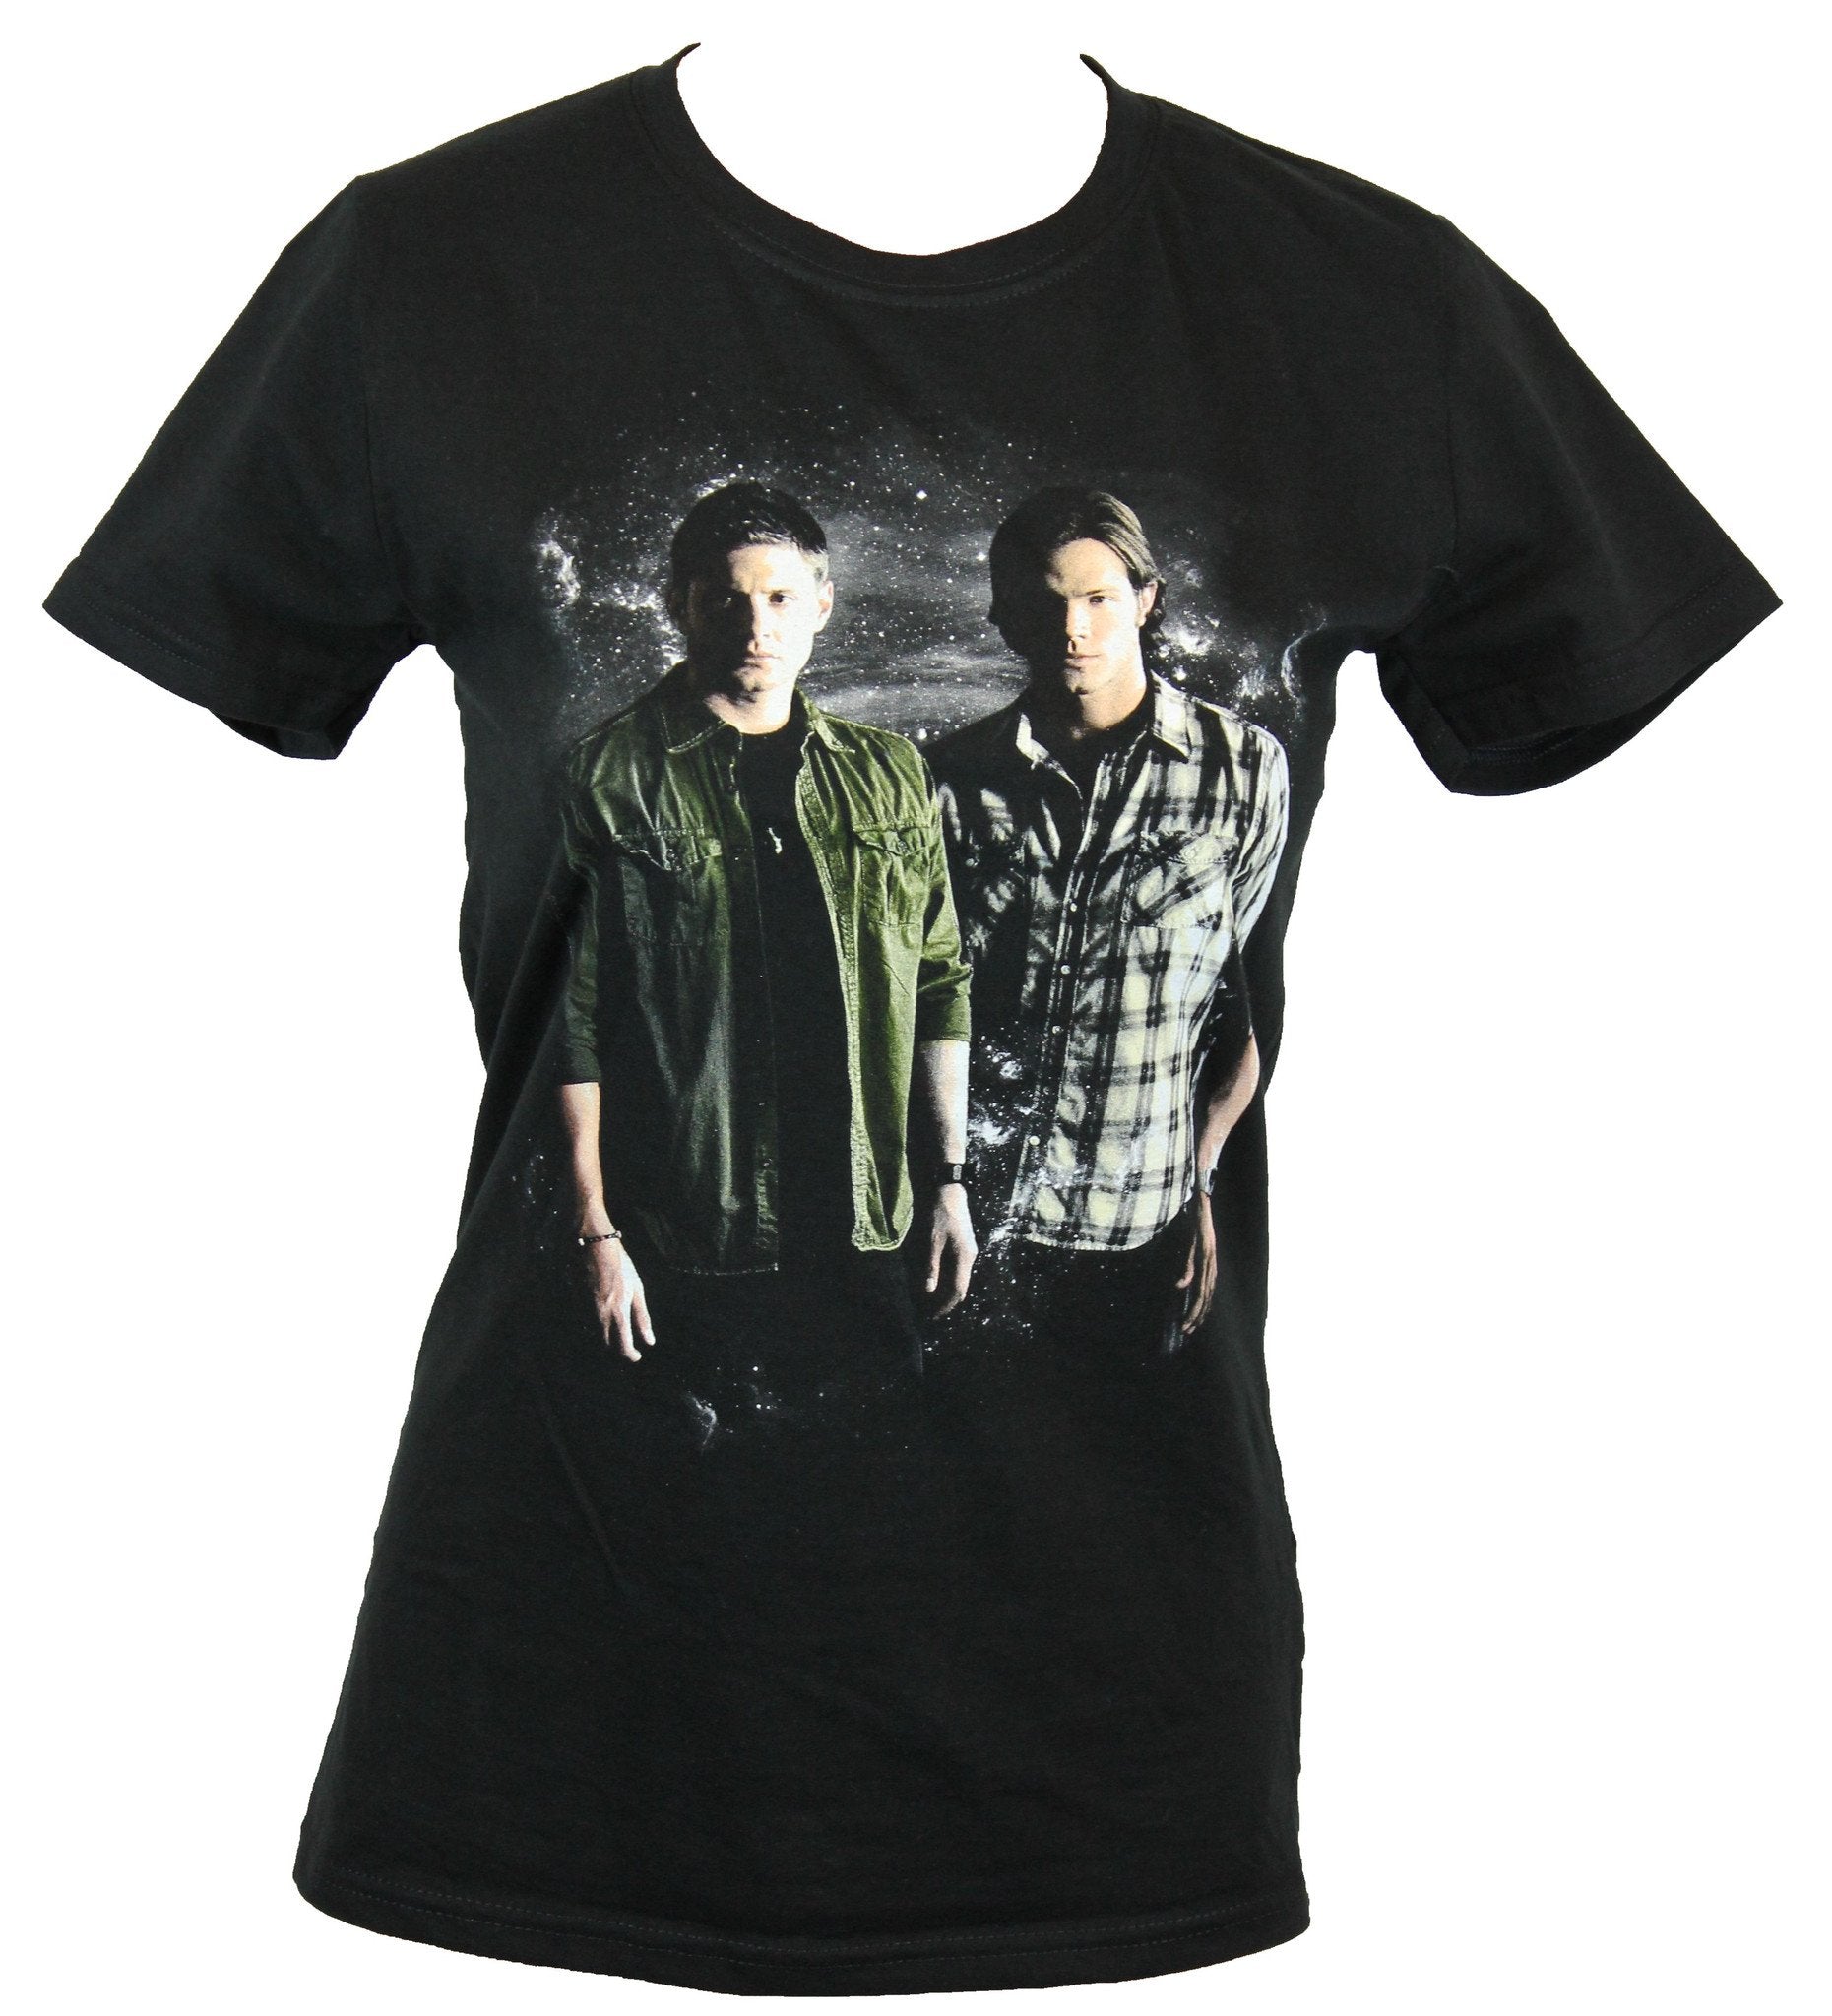 Supernatural Girls Juniors T-Shirt -Sam & Dean in Front of A Spacy Background